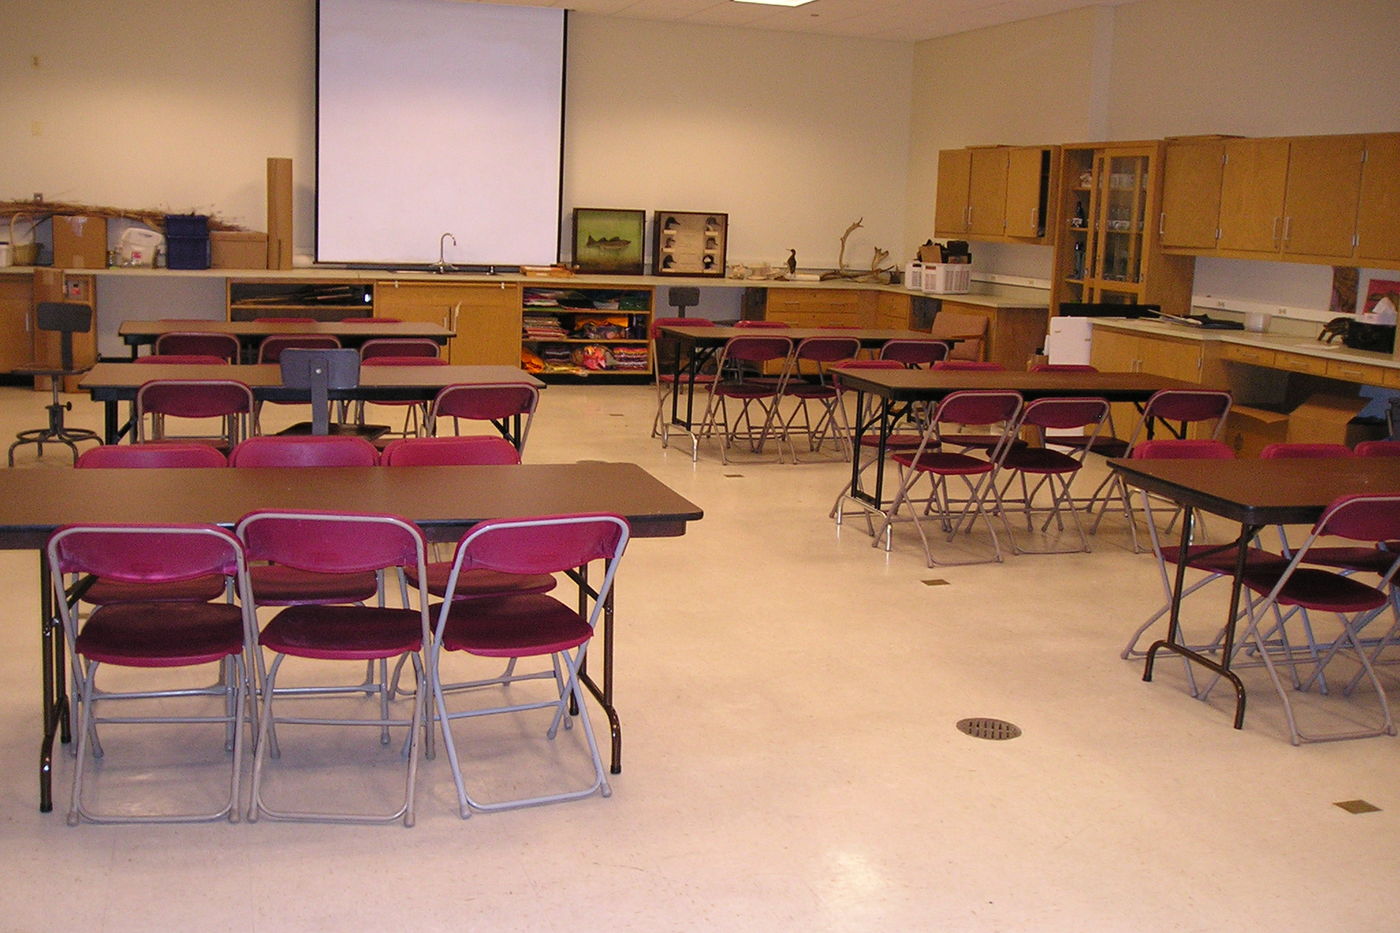 A view of Classroom B. Six desks are arranged in two rows, facing a projector on the wall in the front of the room. Each table seats six guests. Counters and cabinets line the walls of the room.